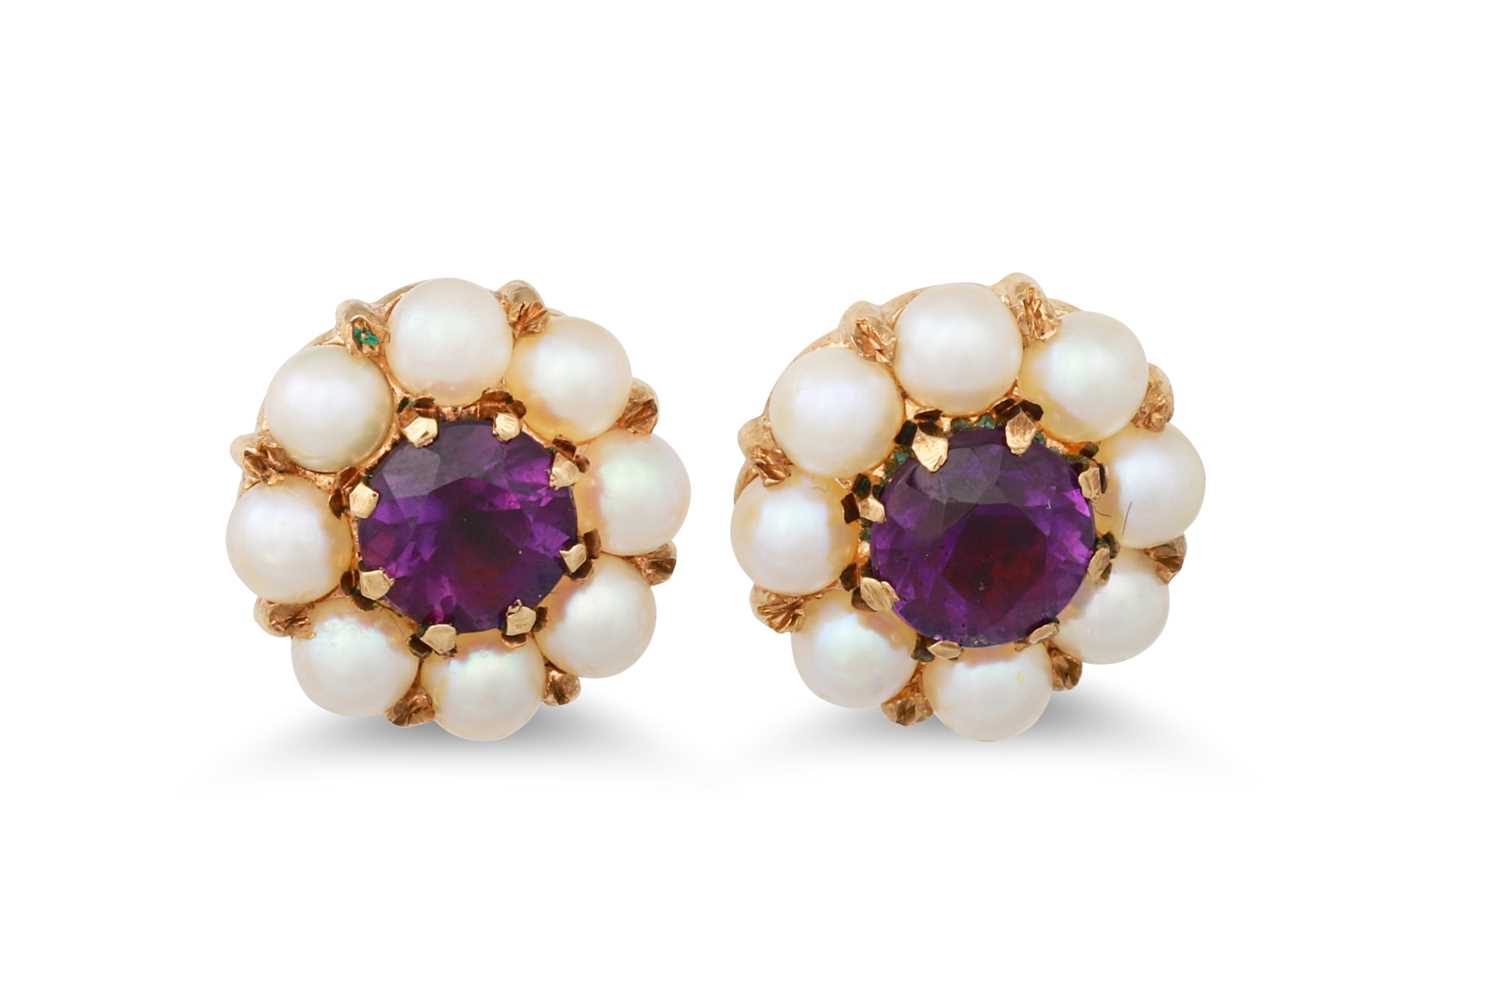 Lot 34 - A PAIR OF PEARL EARRINGS, mounted in gold